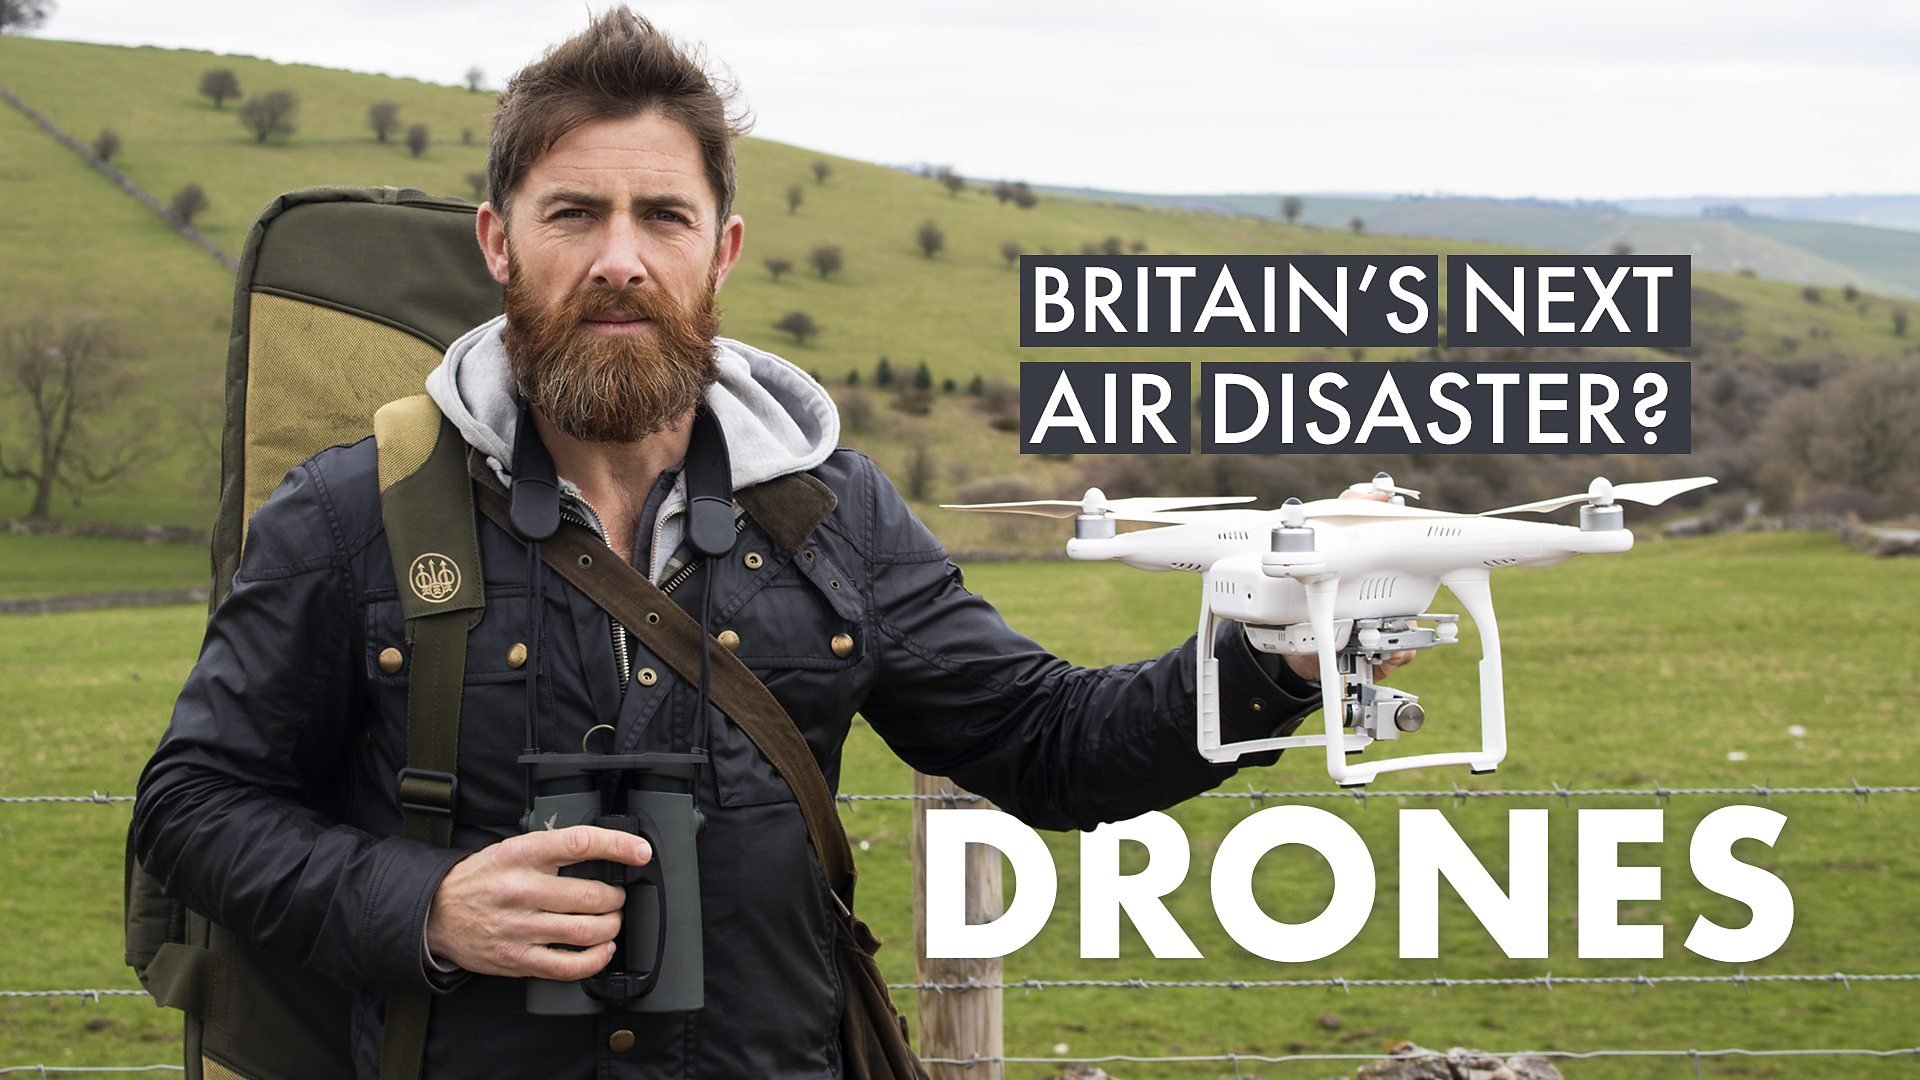 DJI Makes Formal Complaint Against BBC Over Biased Drone Coverage